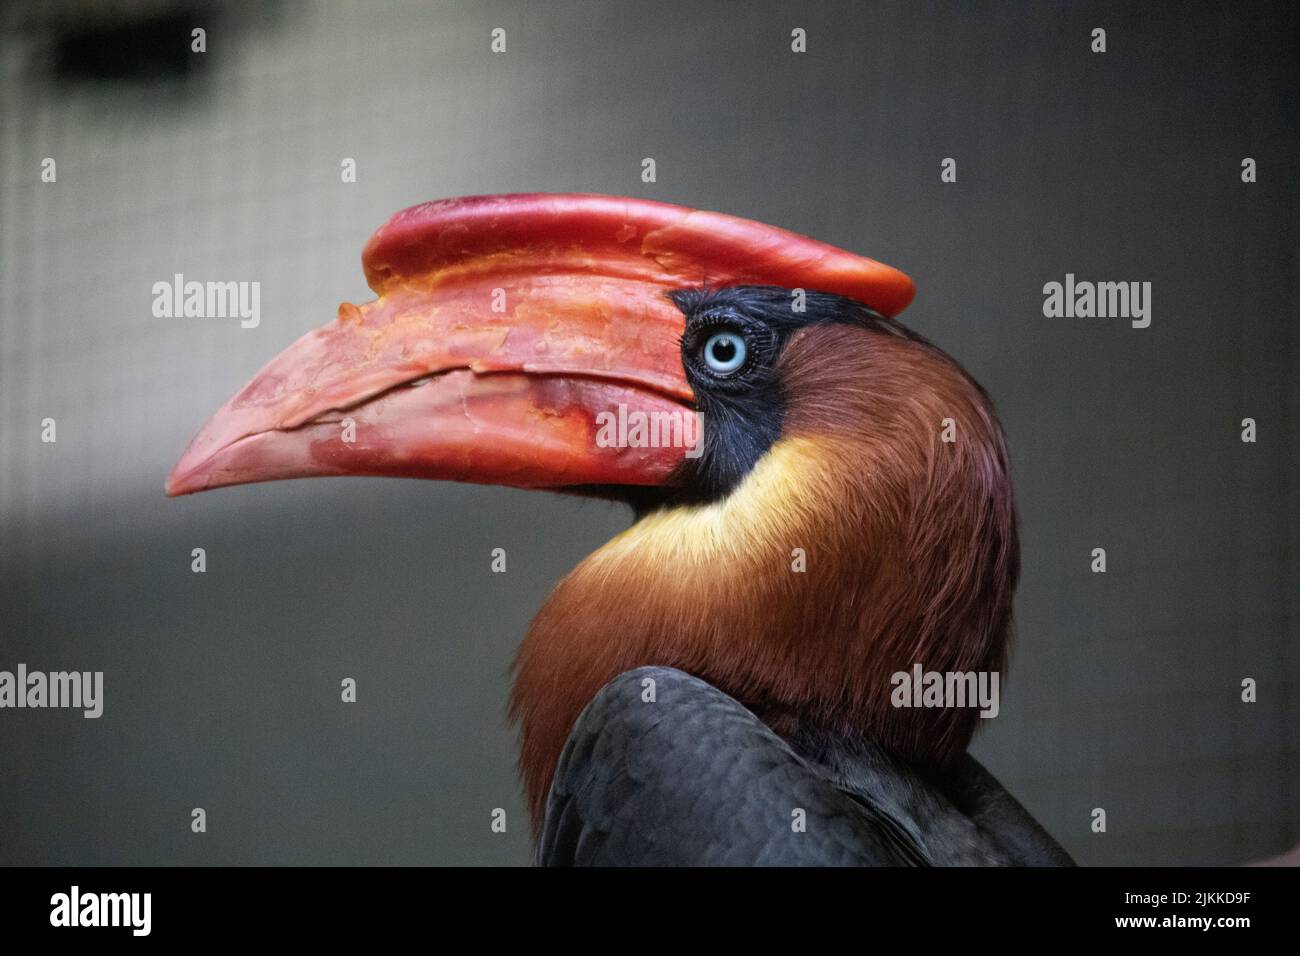 A closeup shot of a rufous hornbill on a blurred gray background in the Colchester zoo Stock Photo